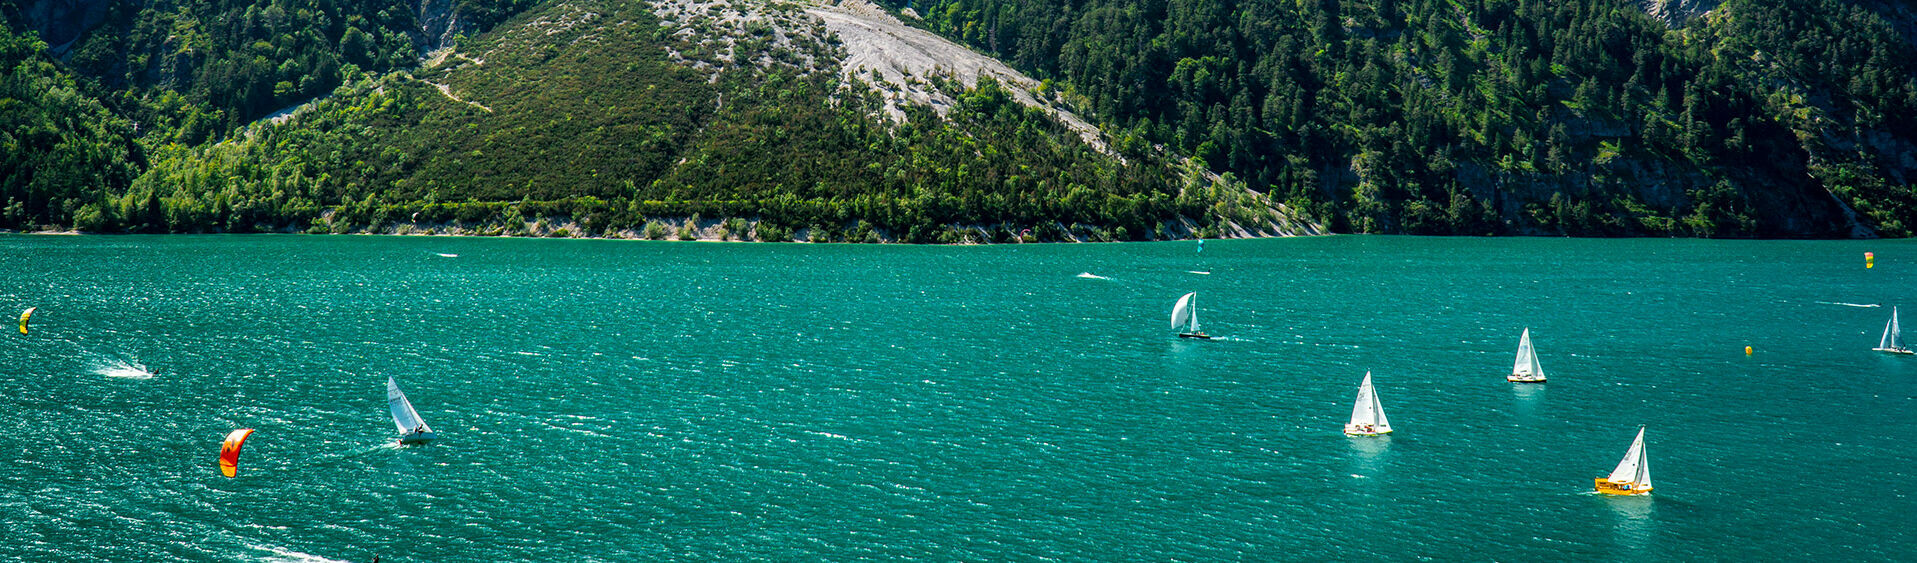 Lake Achensee offers perfect wind conditions for sailing, windsurfing and kitesurfing.